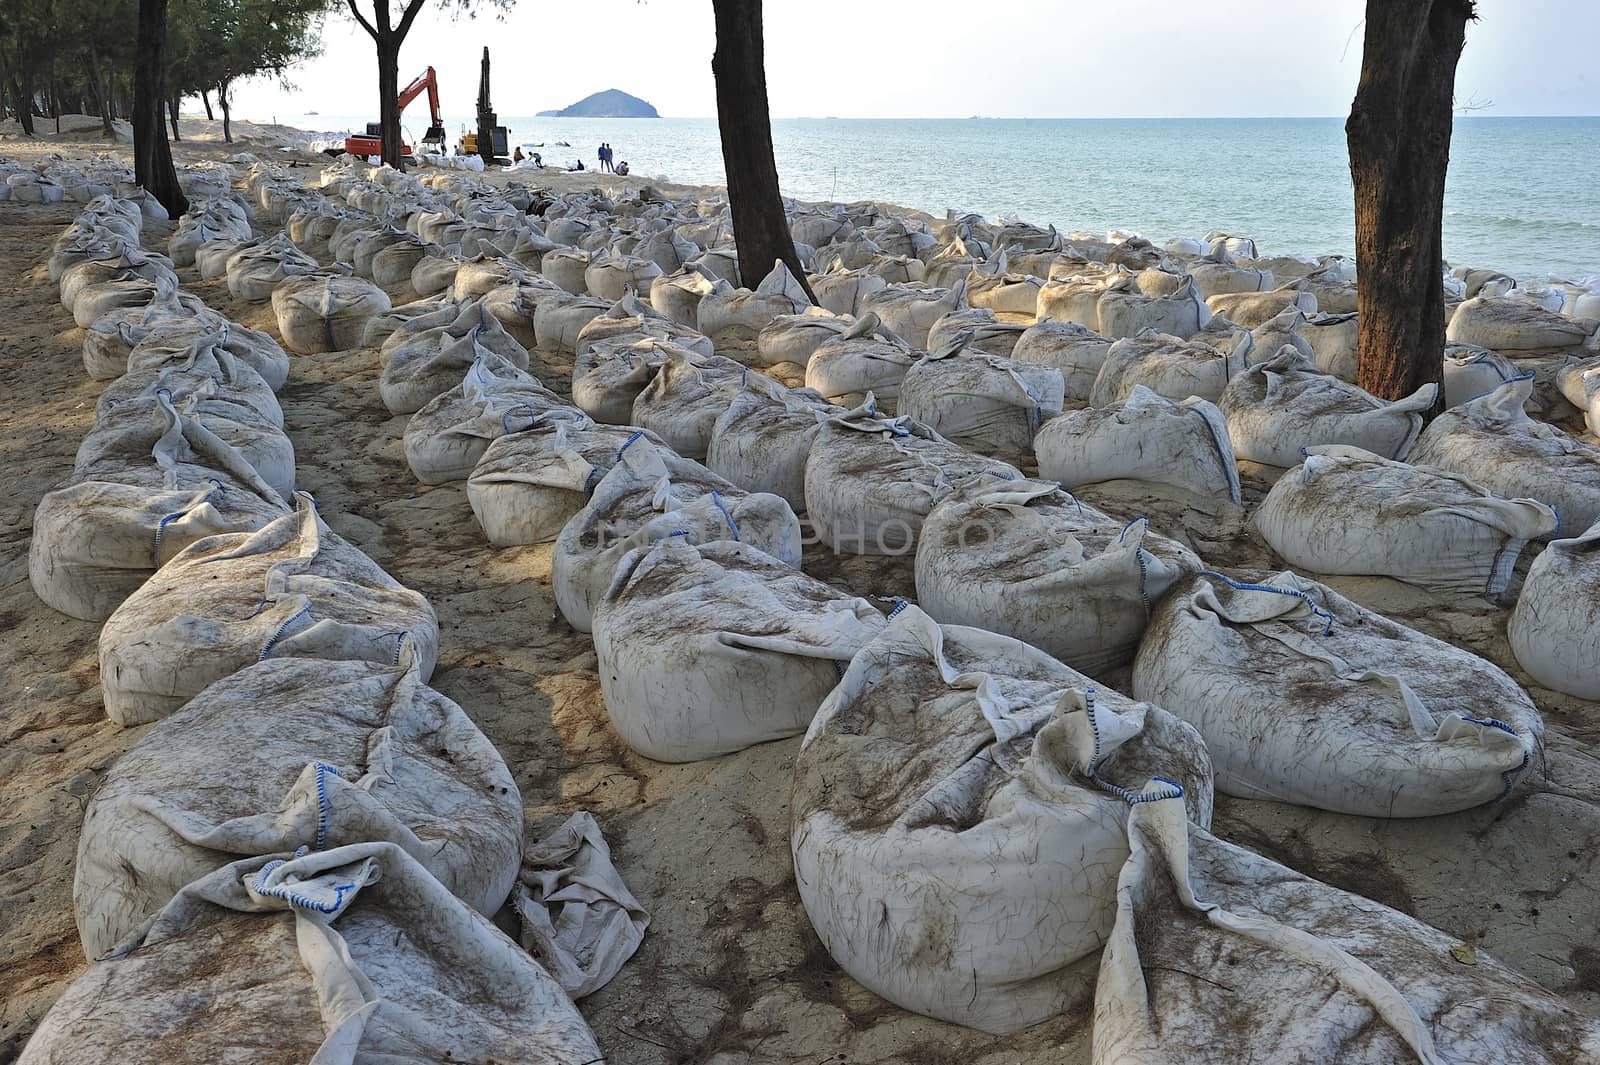 Sand bags along the beach in Songkra to protect from heavy surf by think4photop